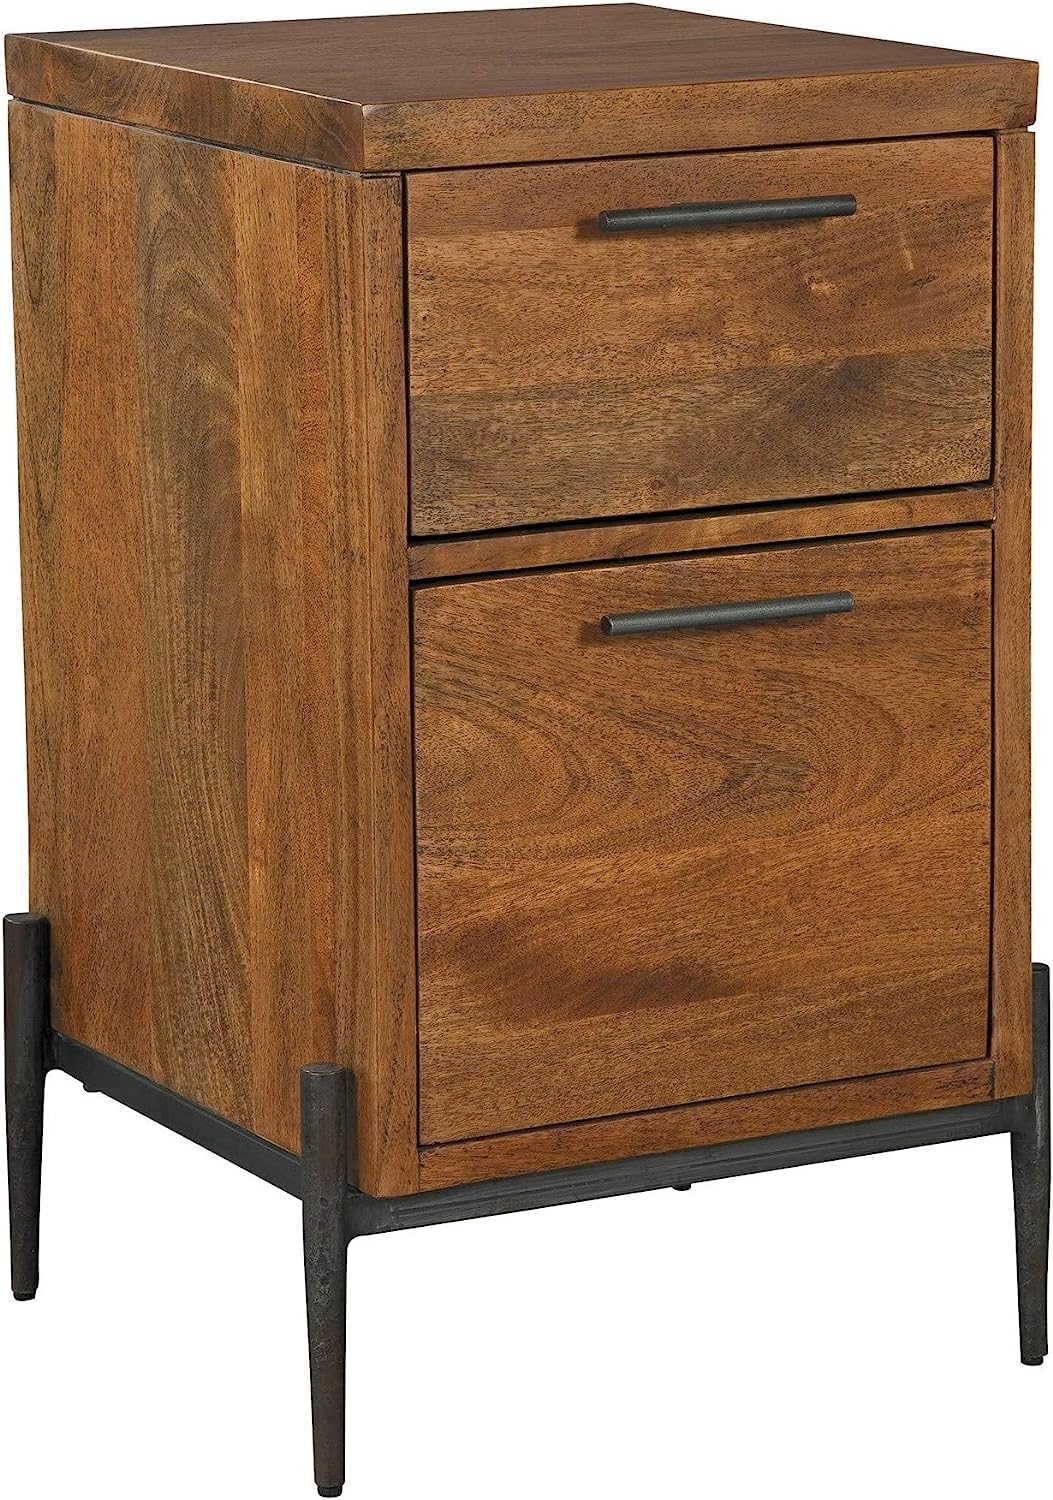 Hekman Furniture Office HomeBedford Filing Cabinet ? Bedford Finish, Durable Mango Solids, Metal Forged Iron Base & Hardware, 2 Storage File Drawers, Rustic Home Decor